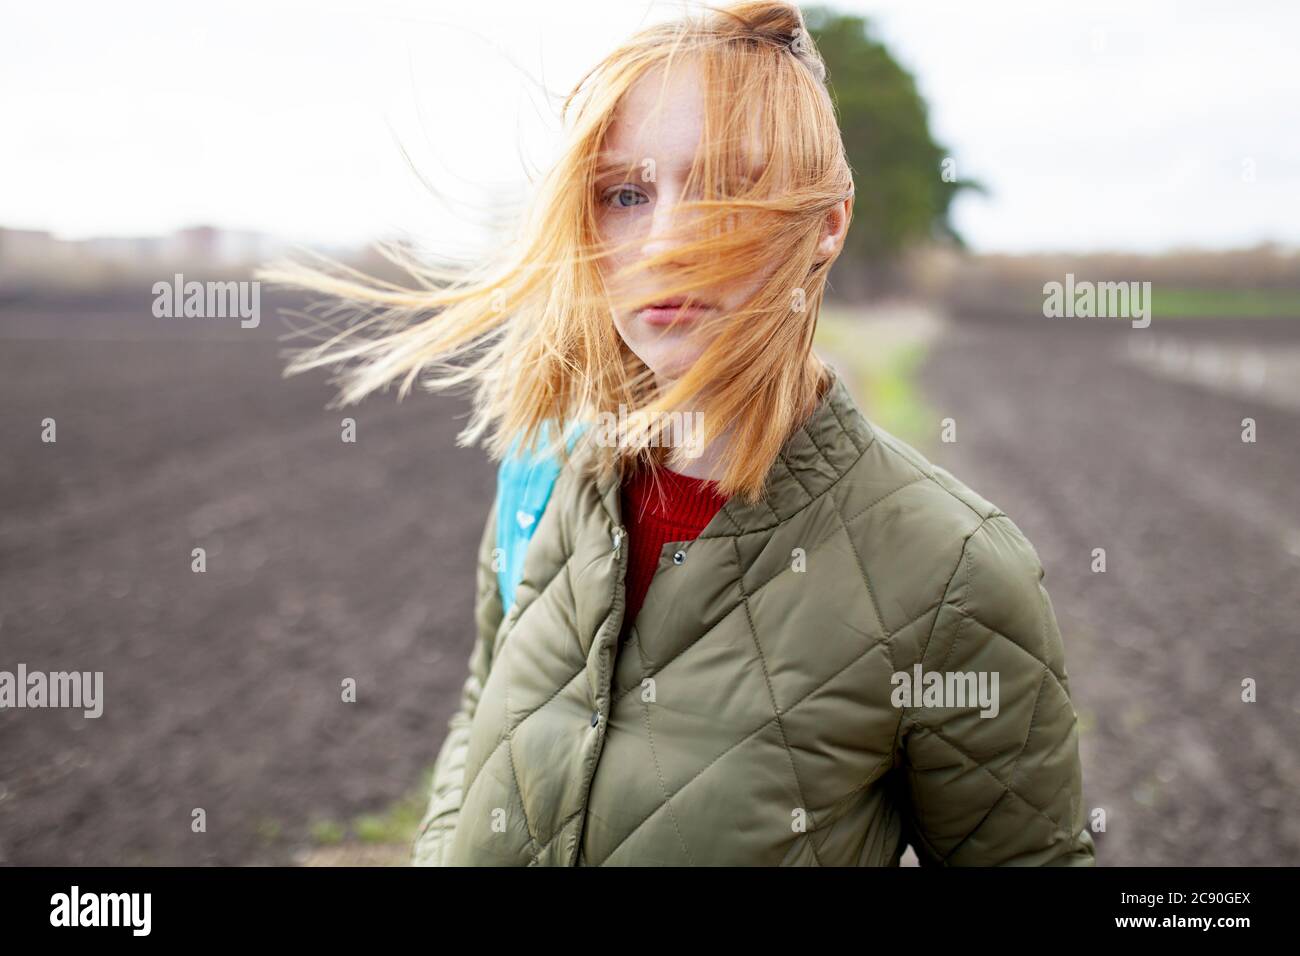 Russia, Omsk, Portrait of young woman in field Stock Photo